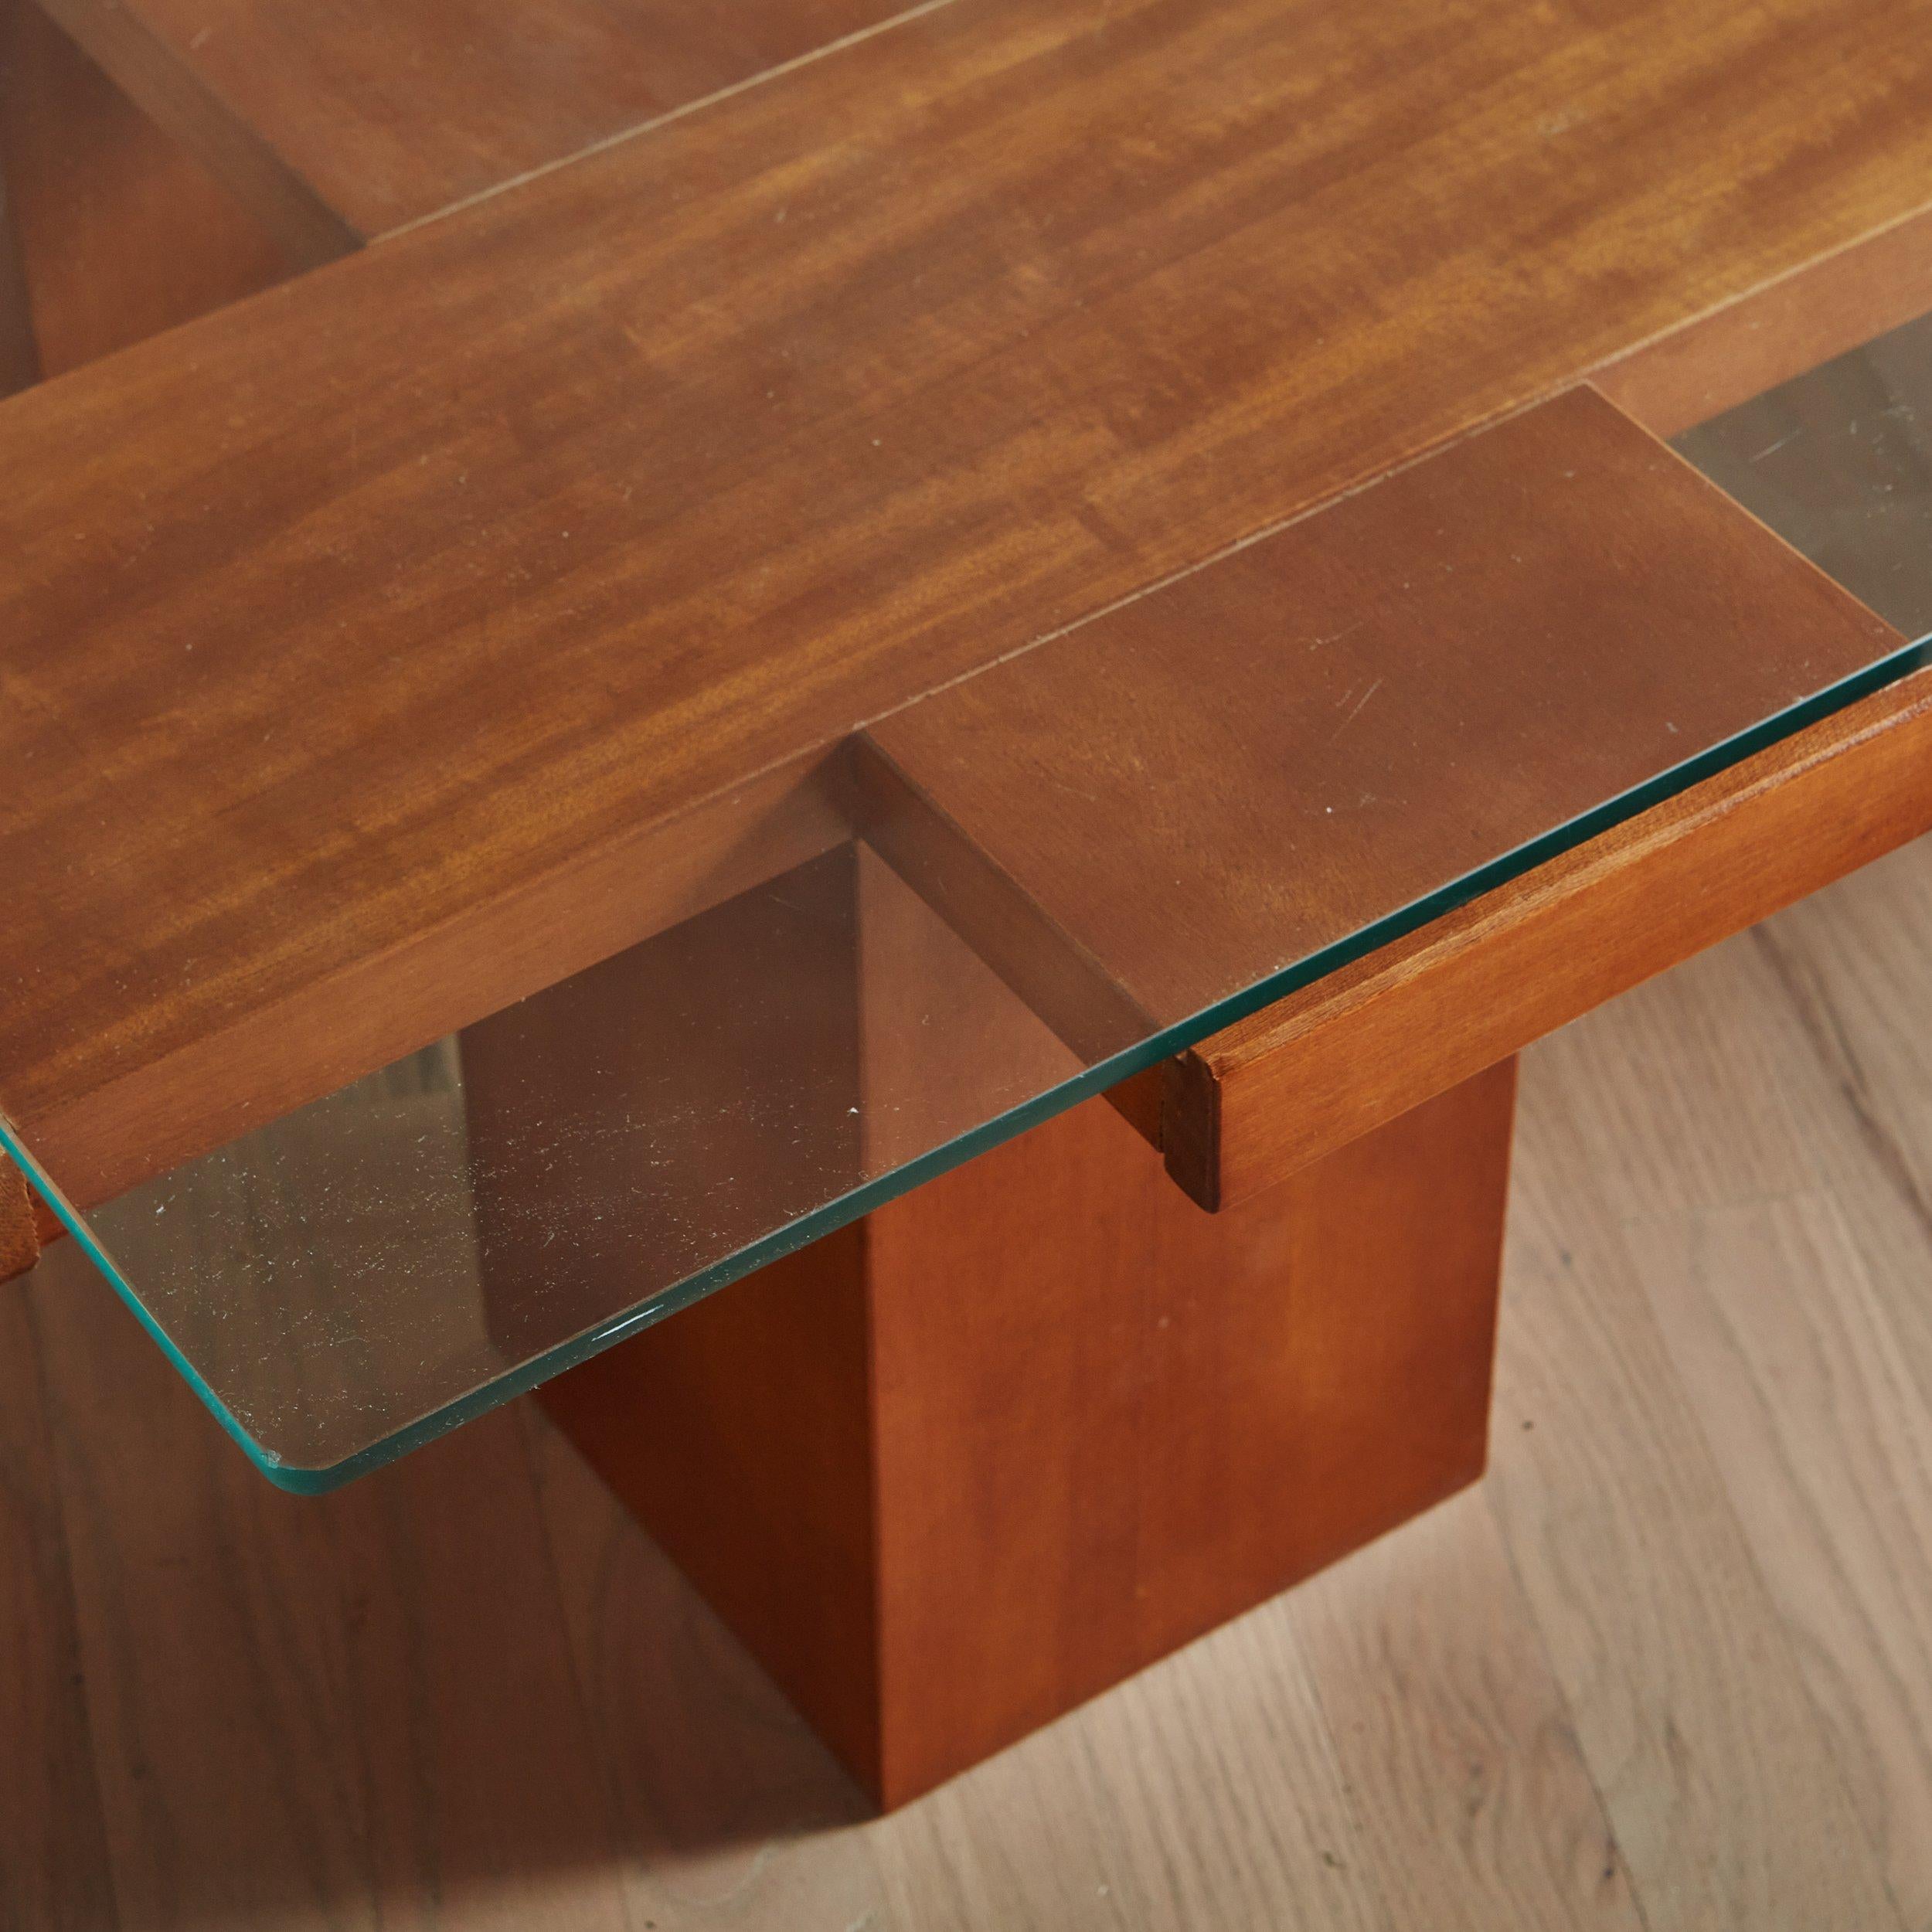 Mid-Century Modern Ash Wood + Glass Coffee Table Attributed to Marco Zanuso for Poggi, Italy 1960s For Sale